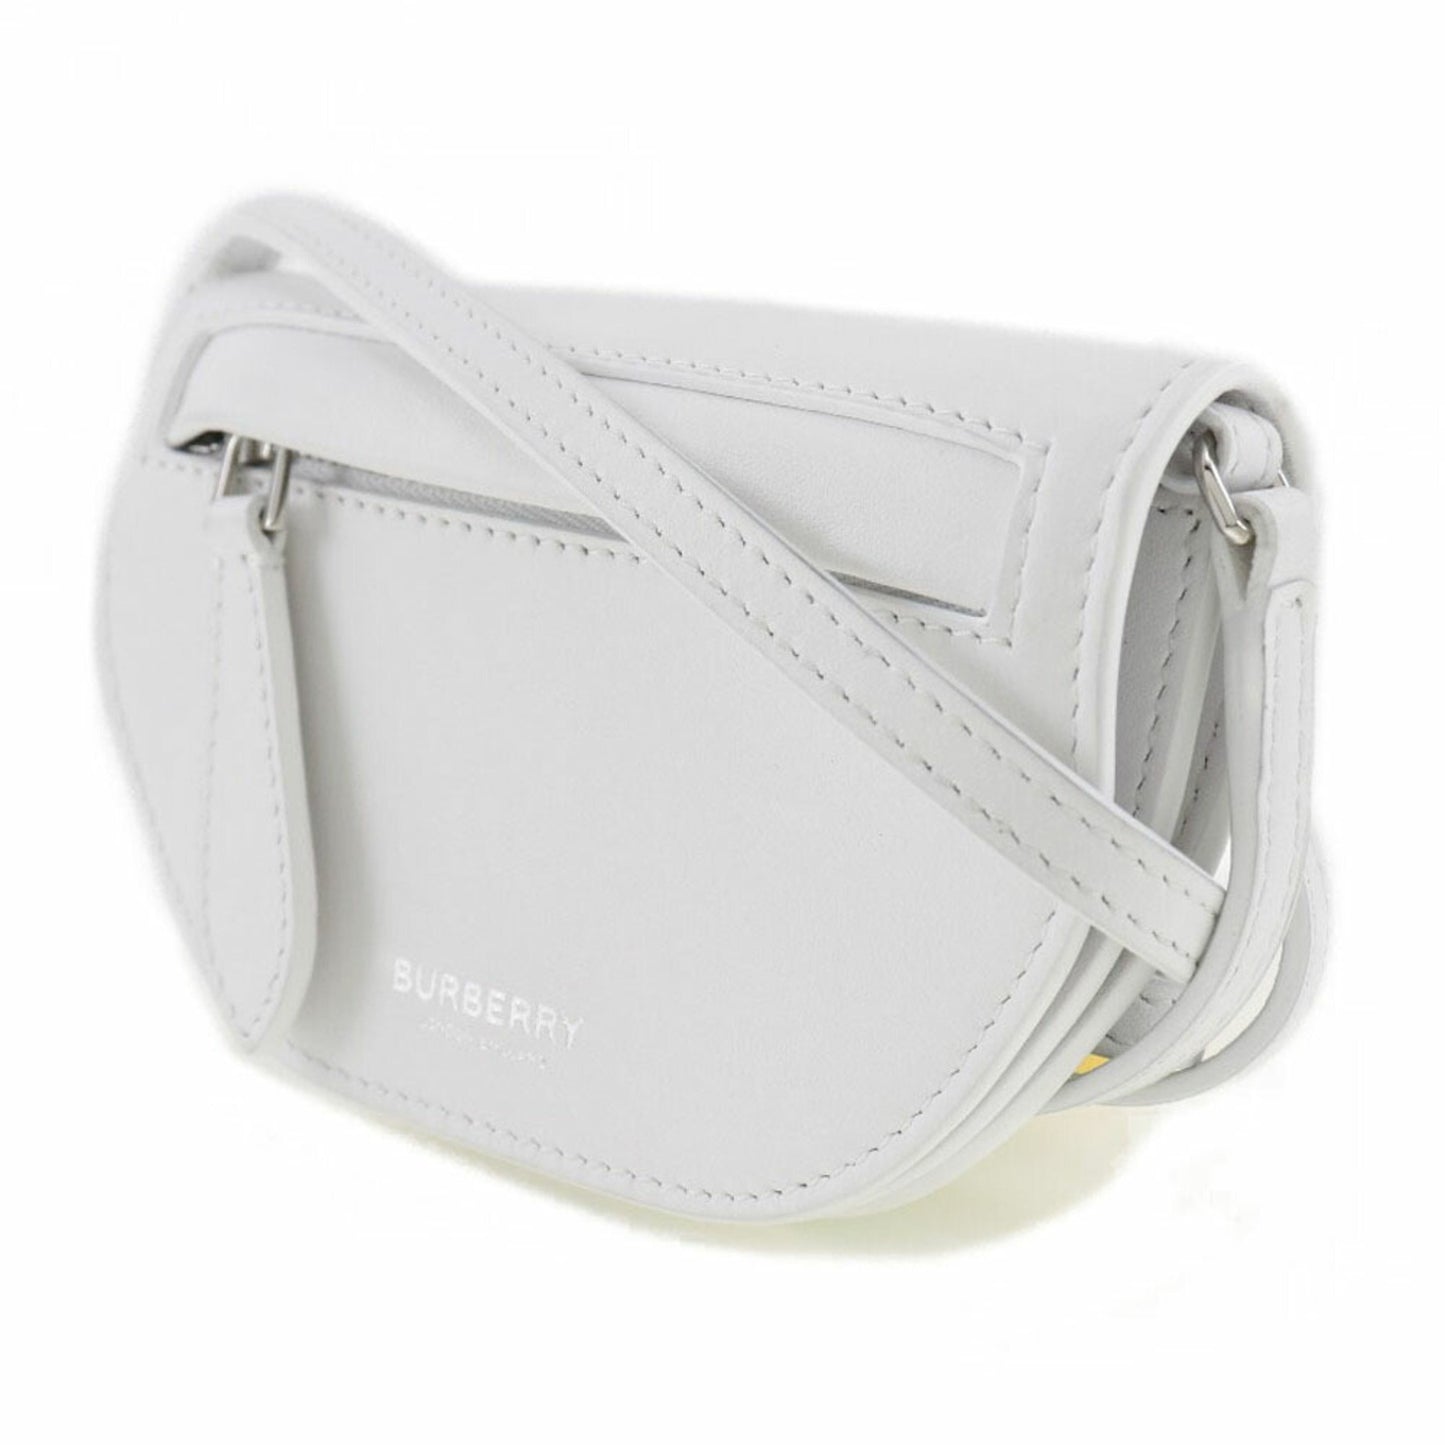 Burberry Women's Burberry Olympia Leather Shoulder Bag in White